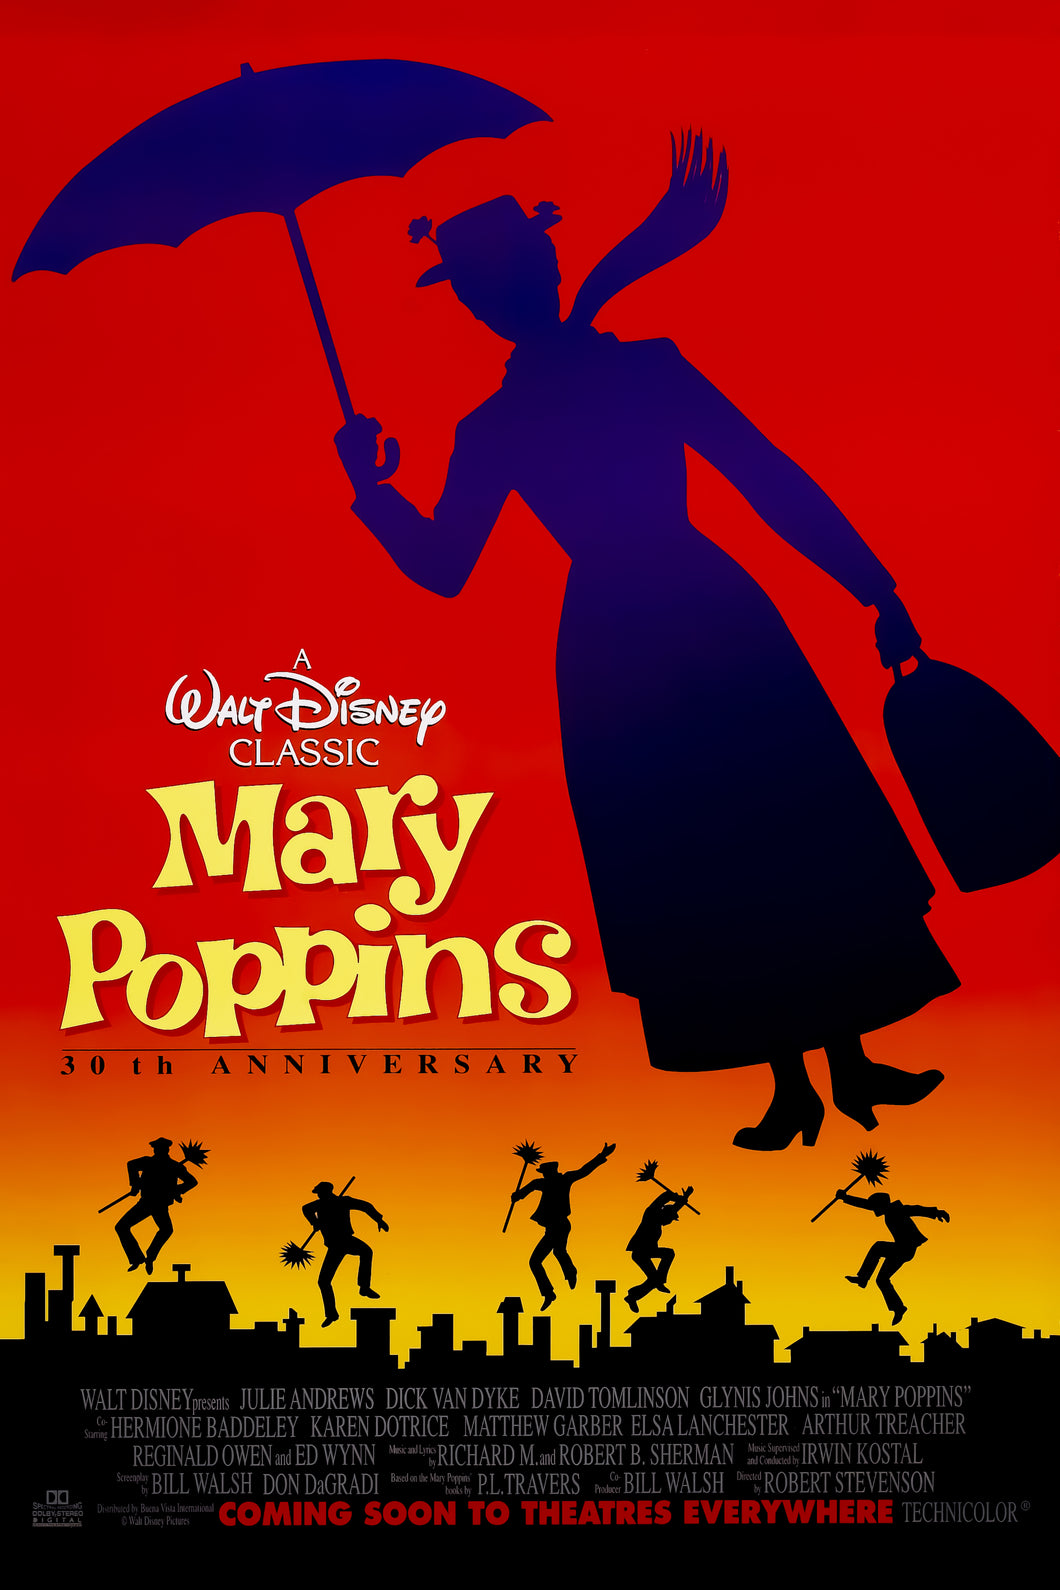 Dick Van Dyke signed Mary Poppins Poster Image #3 (8x10, 11x17)